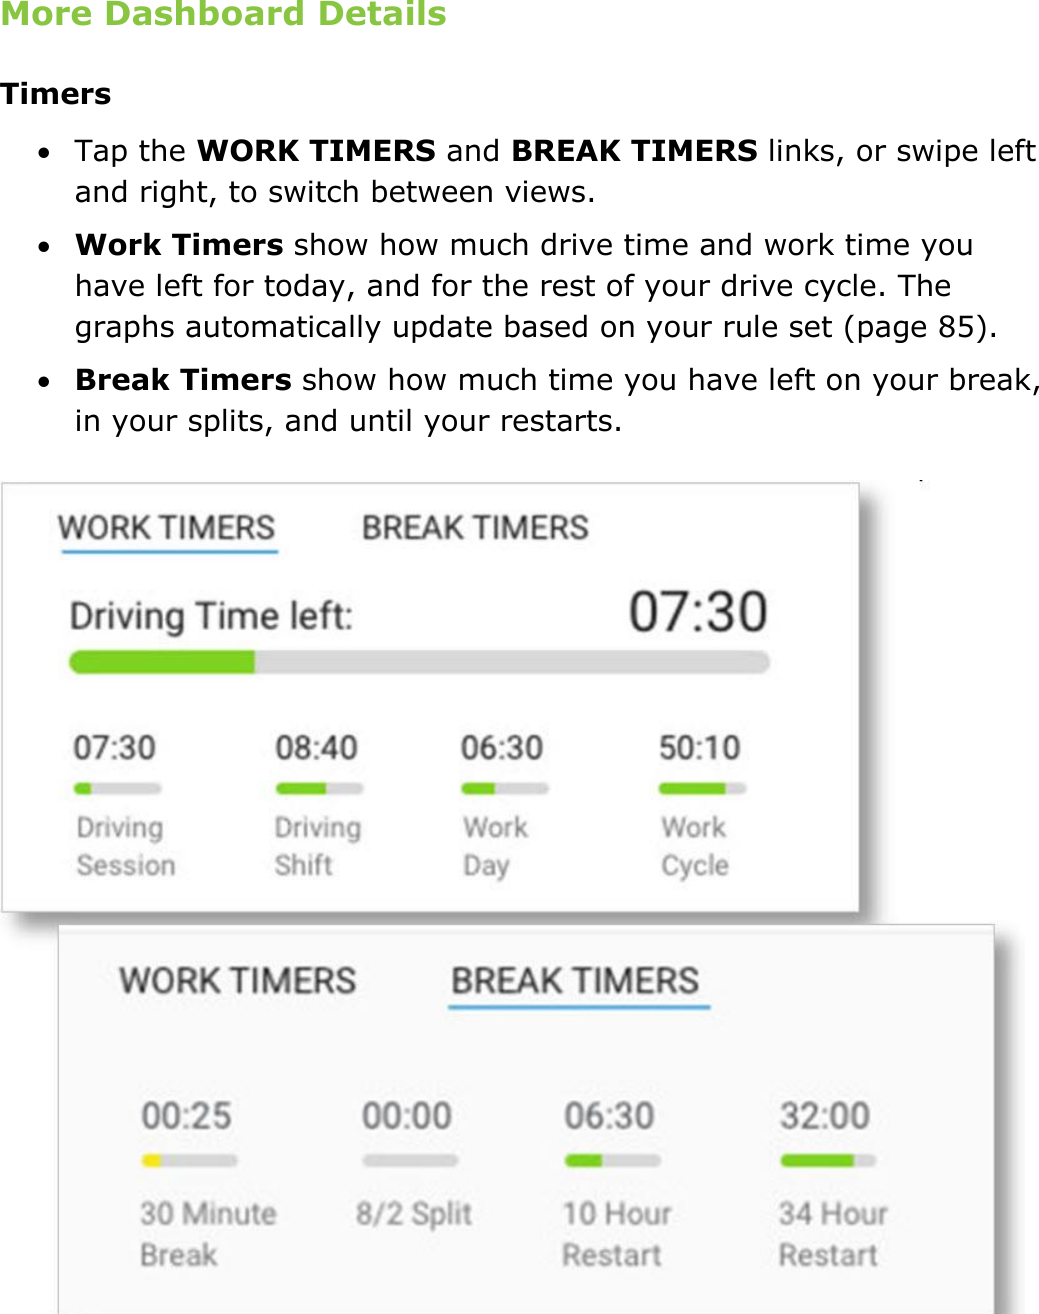 Set My Duty Status DriverConnect User Guide  23 © 2017, Rand McNally, Inc. More Dashboard Details Timers  Tap the WORK TIMERS and BREAK TIMERS links, or swipe left and right, to switch between views.  Work Timers show how much drive time and work time you have left for today, and for the rest of your drive cycle. The graphs automatically update based on your rule set (page 85).  Break Timers show how much time you have left on your break, in your splits, and until your restarts.    